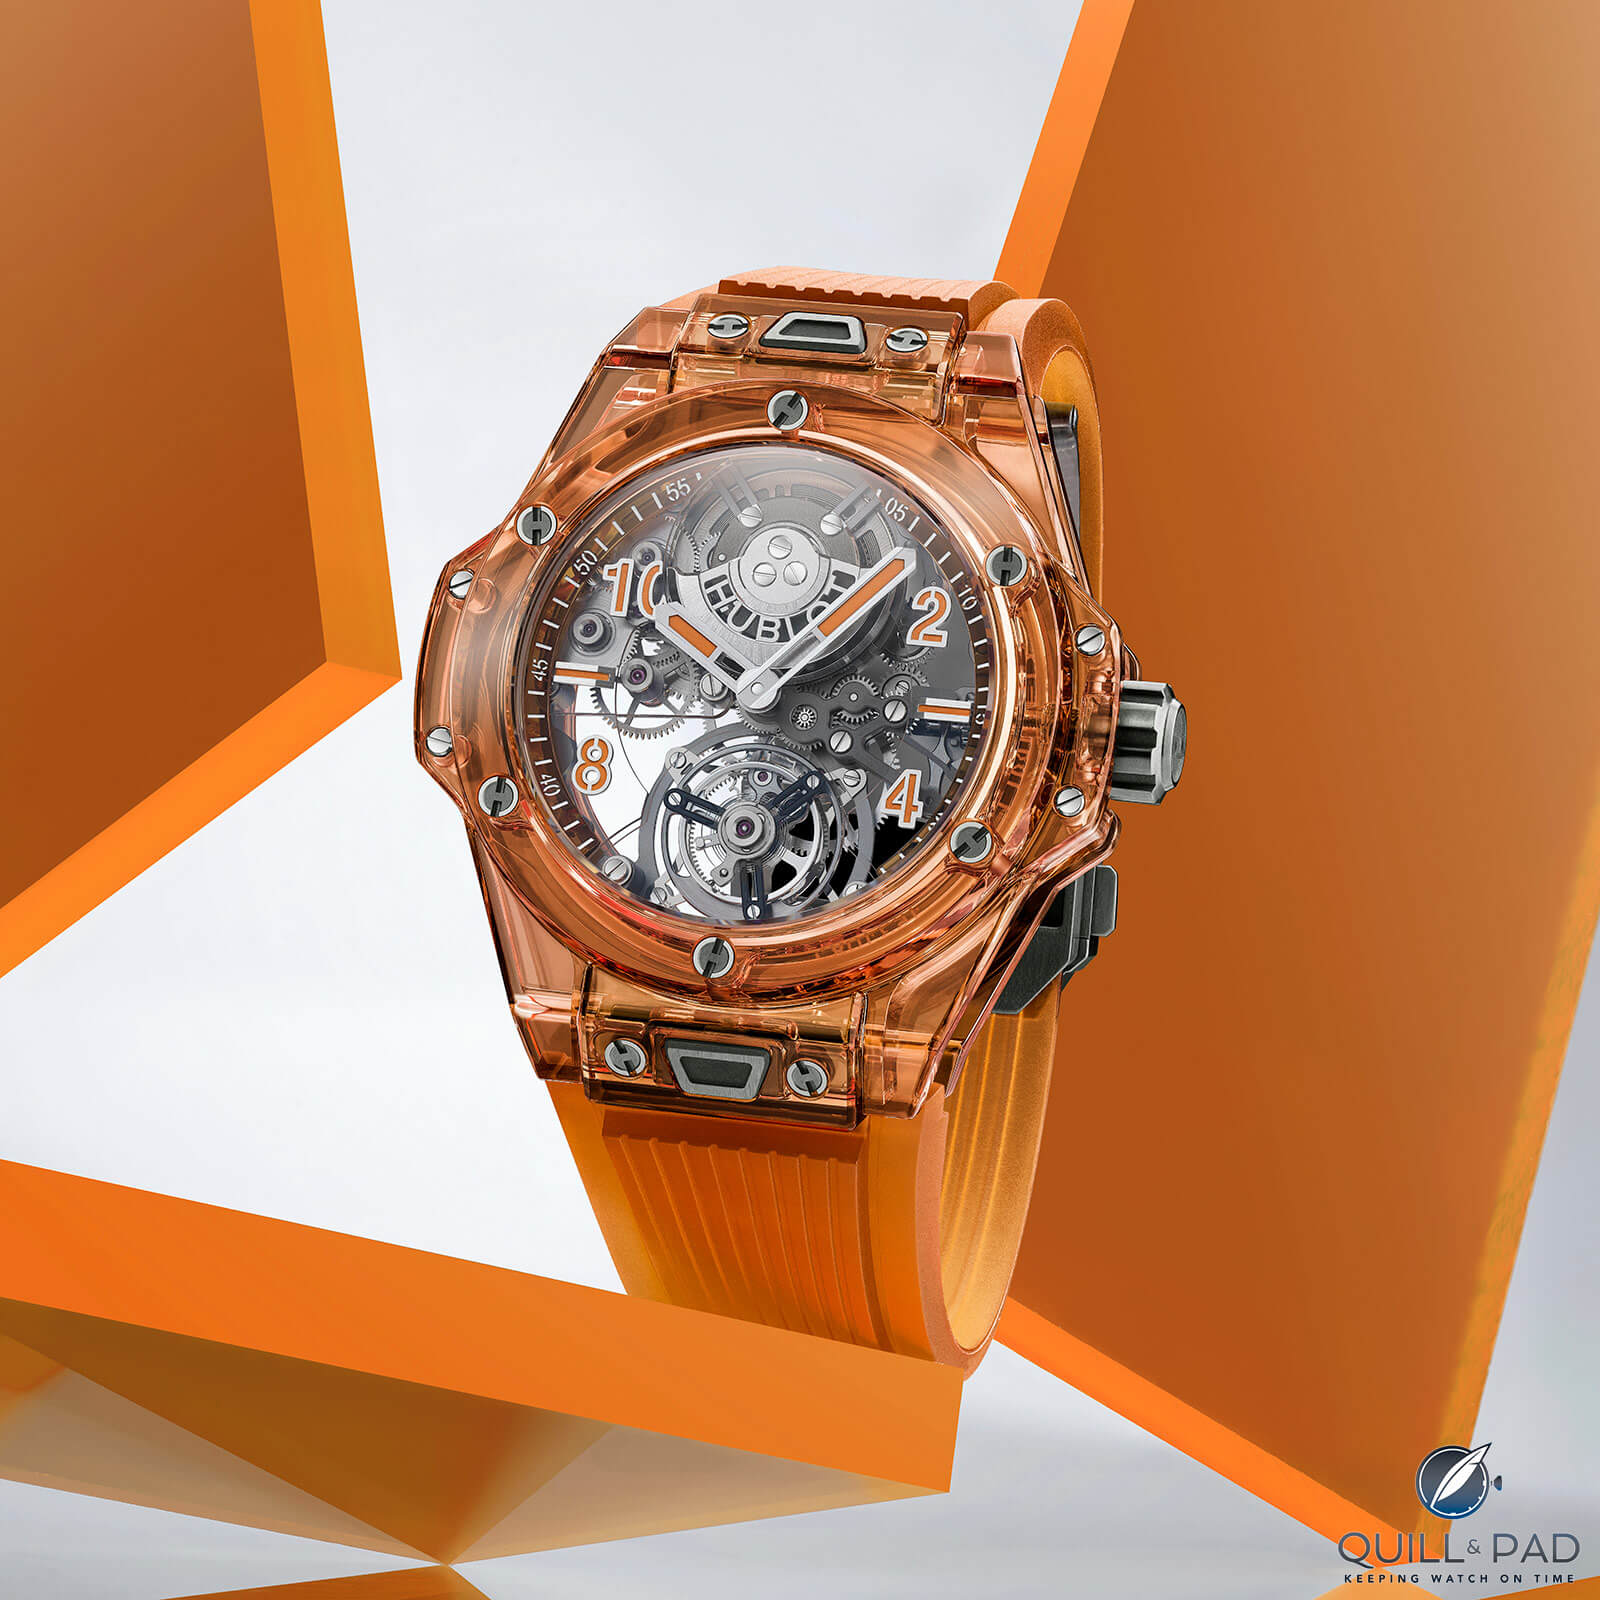 One-off watches by Louis Vuitton, Bell & Ross, Biver, Bovet, Hublot